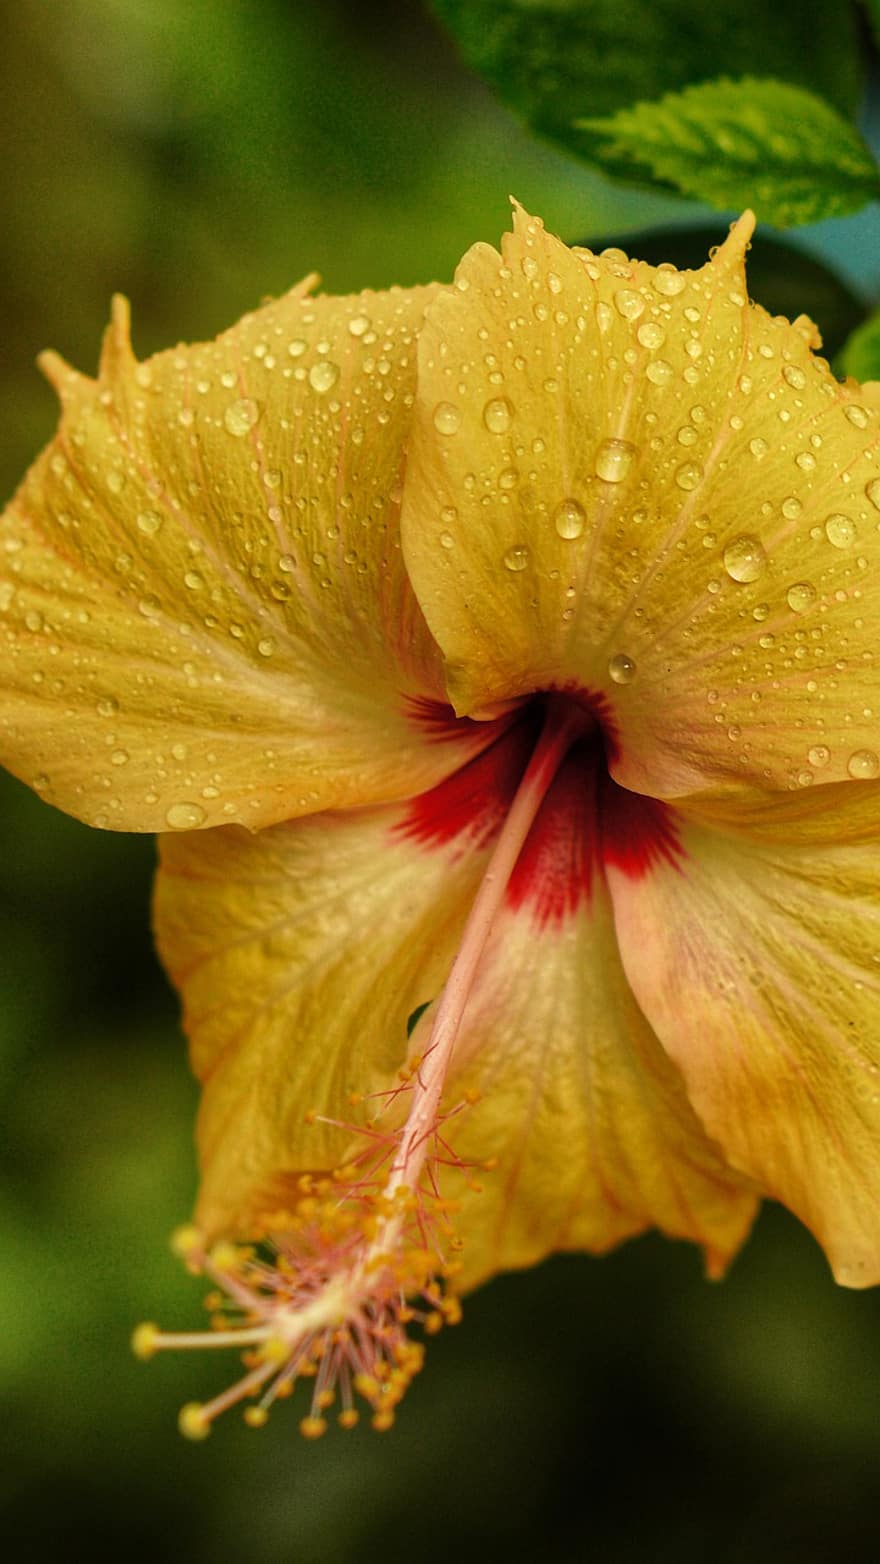 Hibiscus, Flower, Dew, Dewdrops, Droplets, Raindrops, Wet, Yellow Flower, Bloom, Blossom, Plant